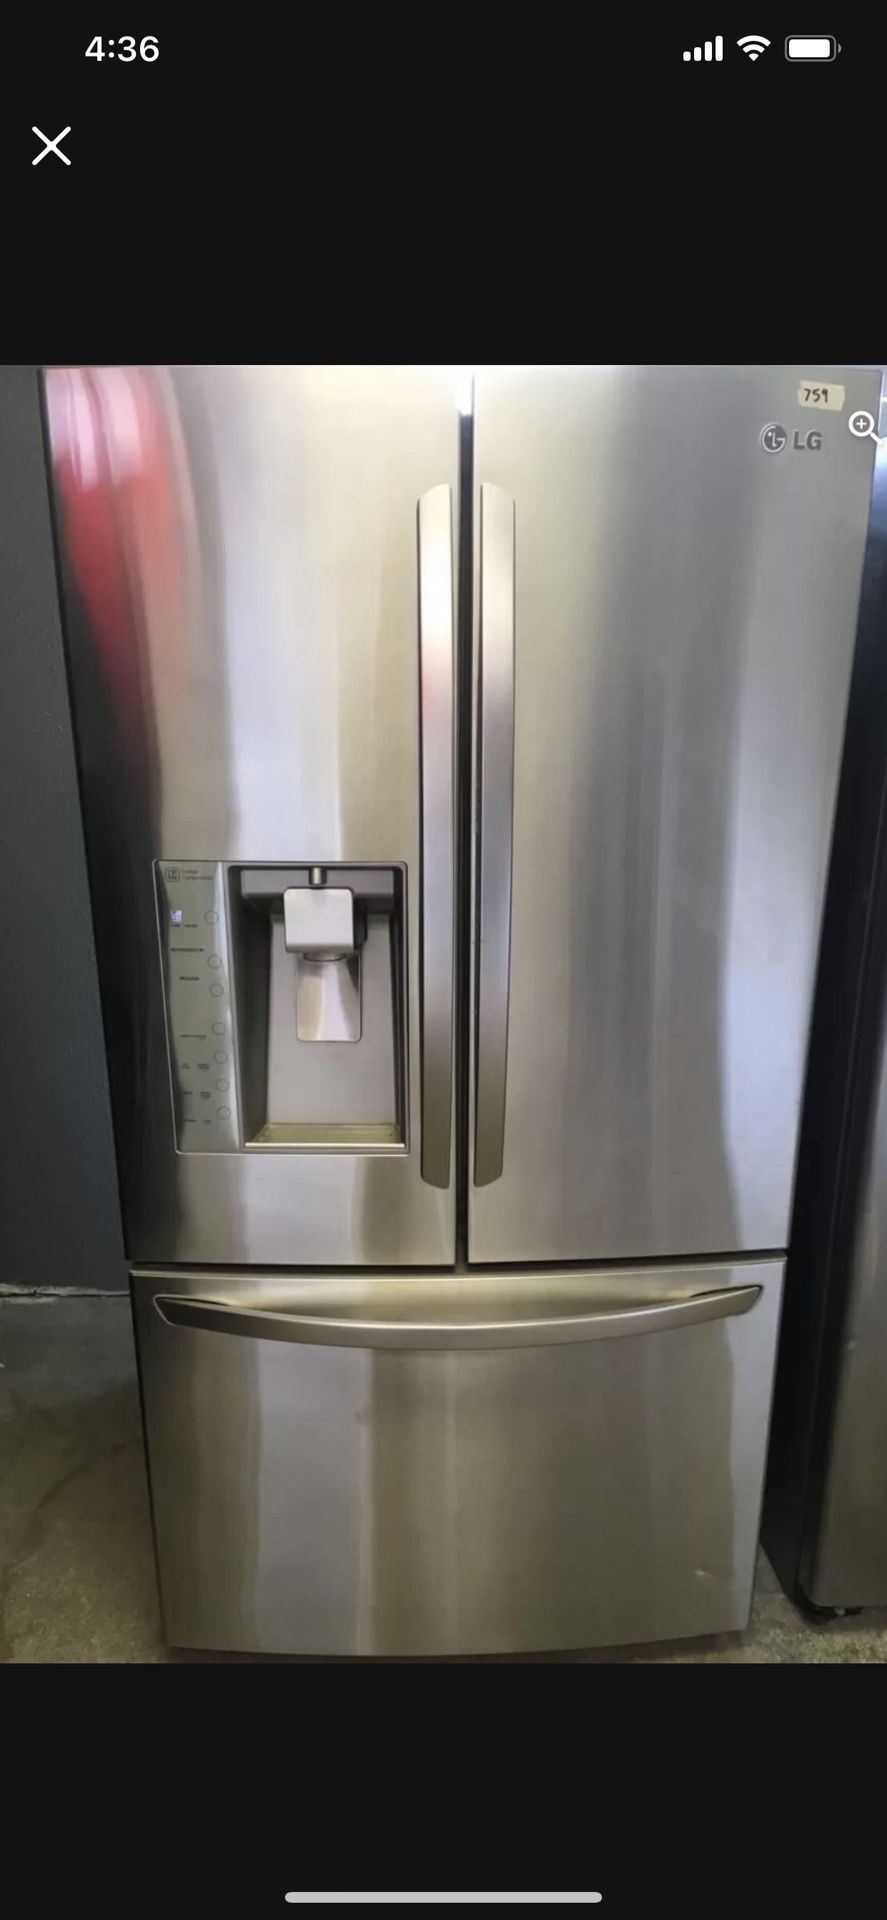 Must Sell !! LG Refrigerator!!!! Great Price !!!